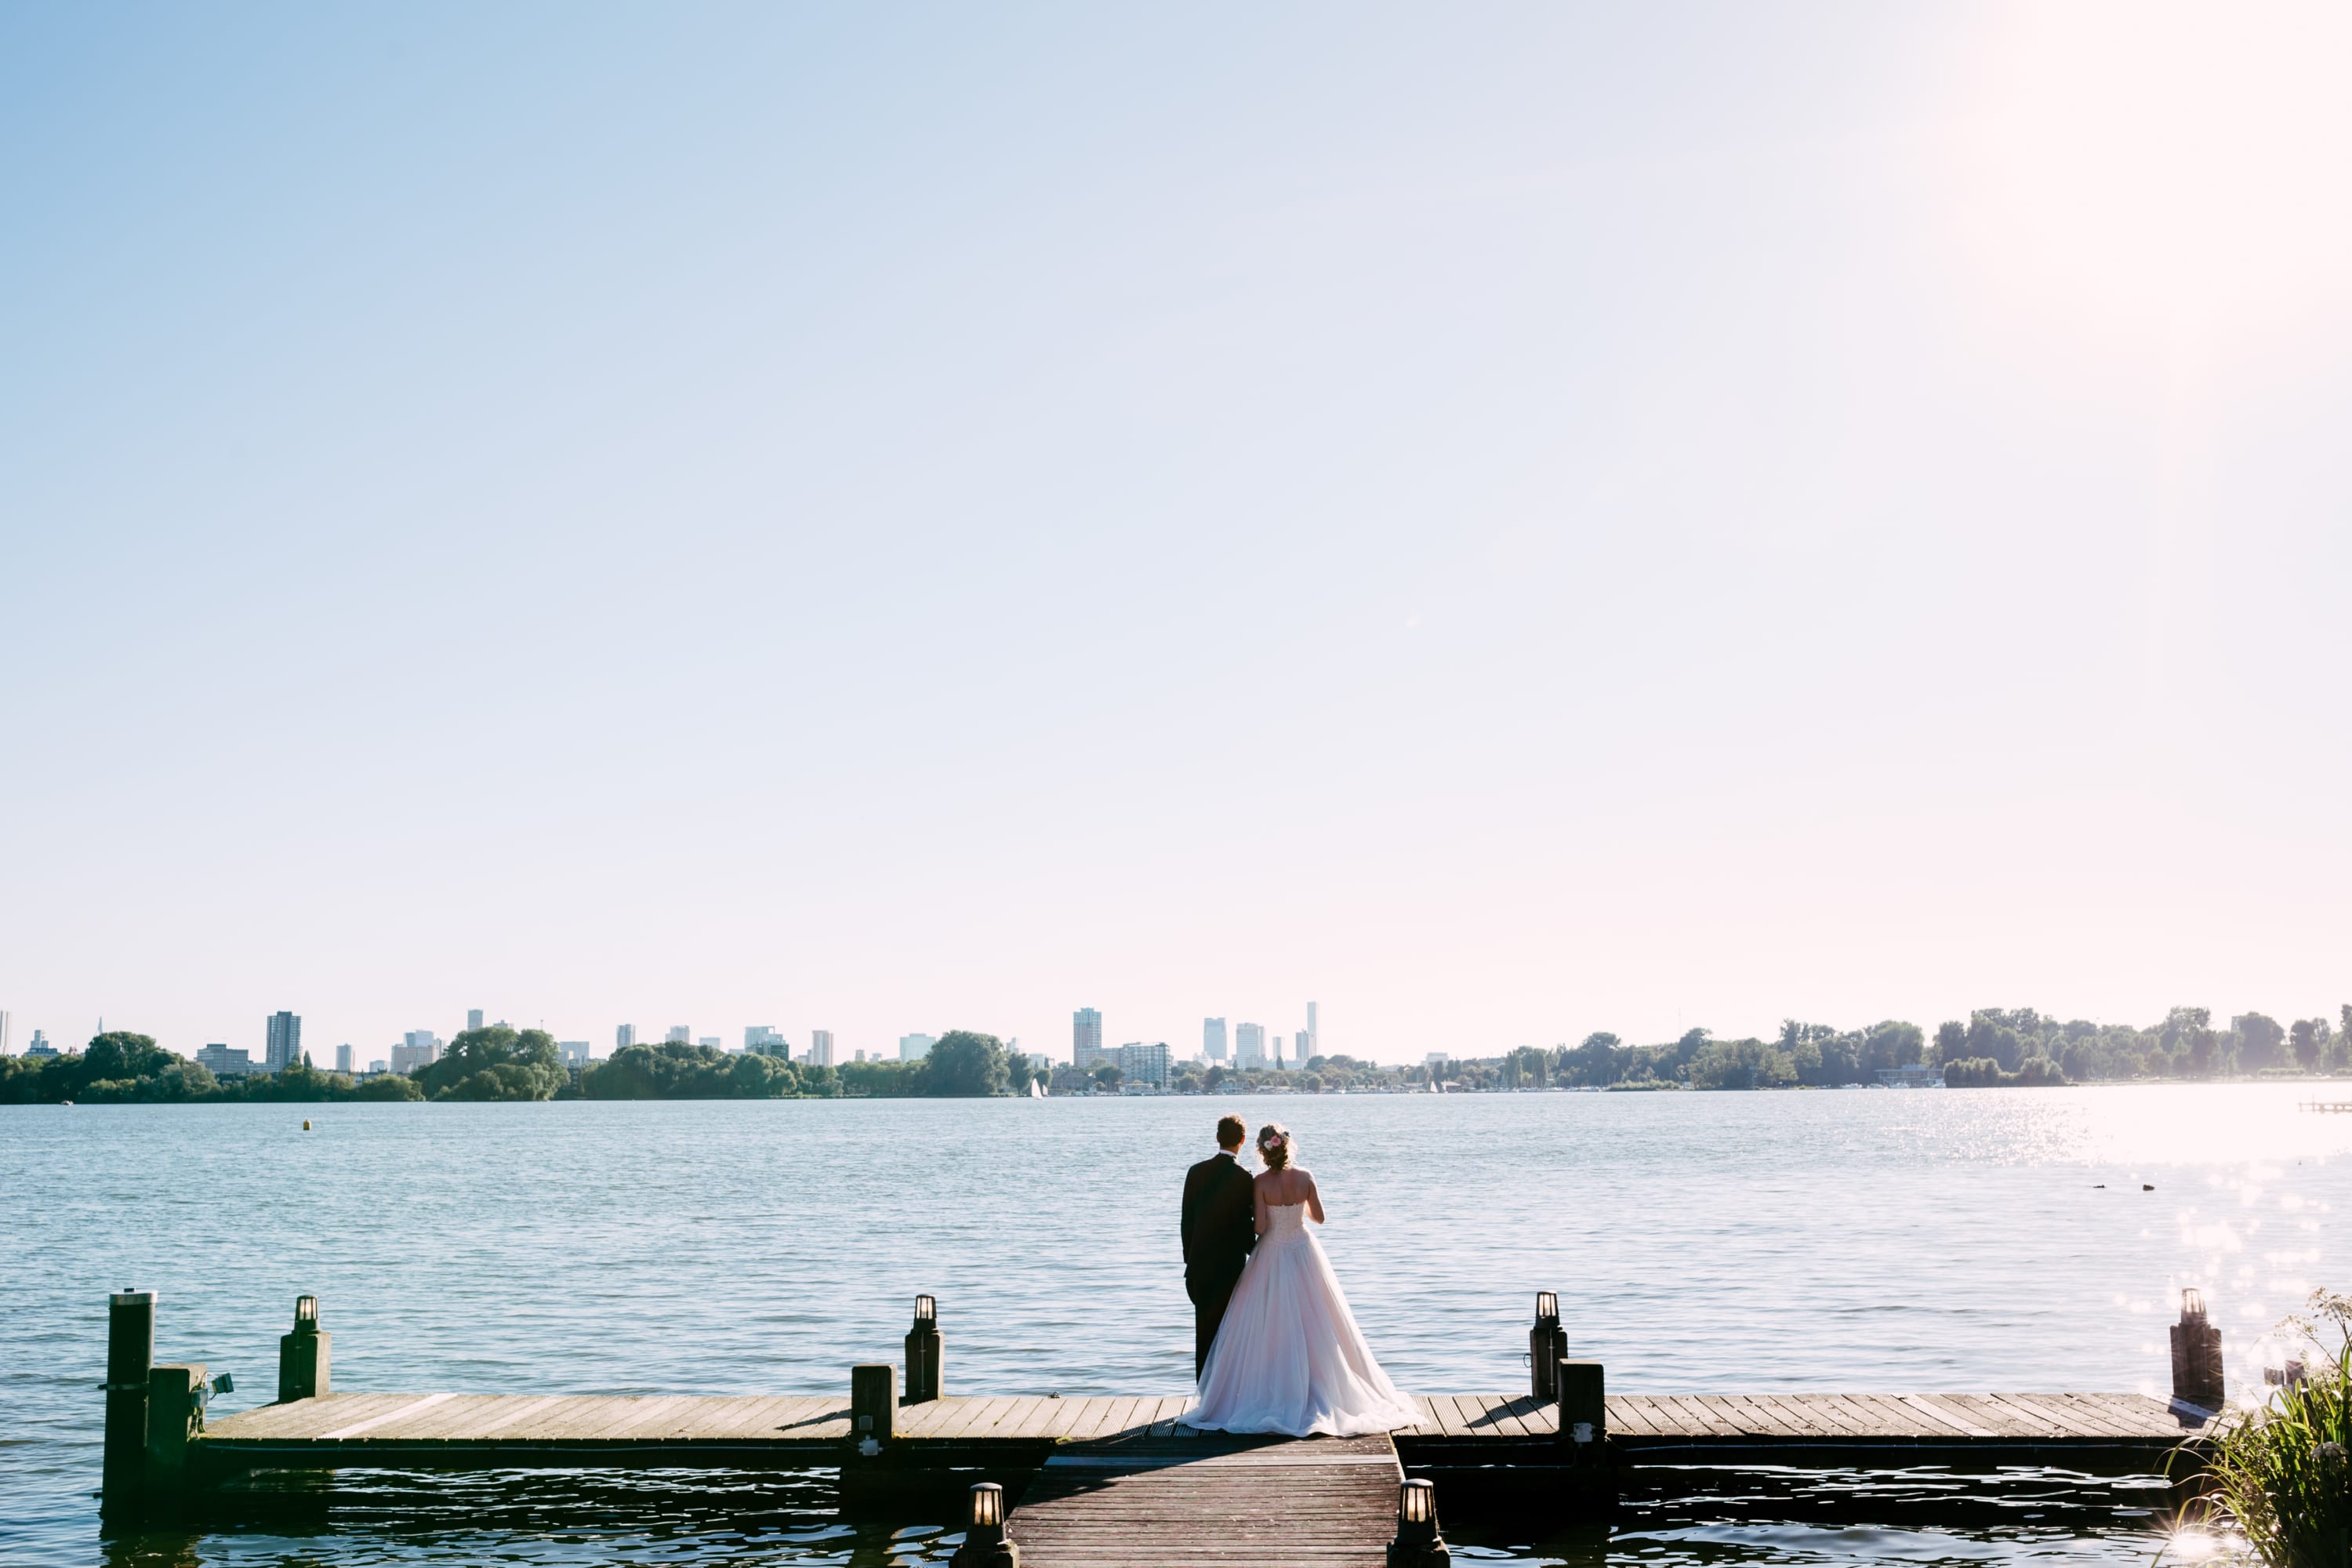 A bride and groom stand on a quay in front of a beautiful lake and embrace each other on their wedding day.